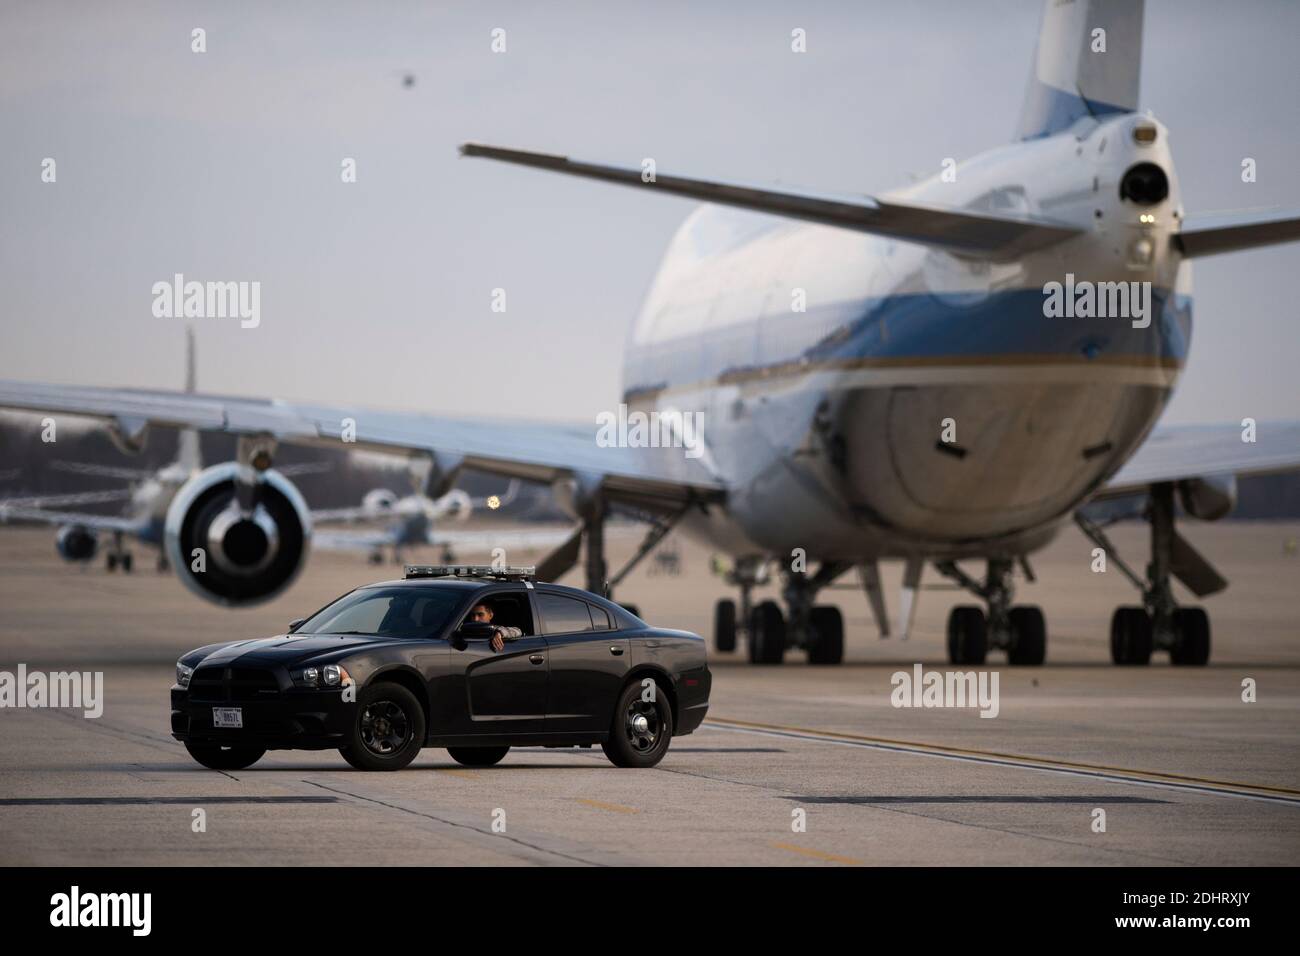 A military police officer sits in his car on the tarmac after Air Force One arrived, with US President Barack Obama aboard, at Joint Base Andrews, Maryland, USA, 25 March 2016. President Obama returned on the over night flight from his trip to Cuba and Argentina.Photo by Shawn Thew/Pool/ABACAPRESS.COM Stock Photo